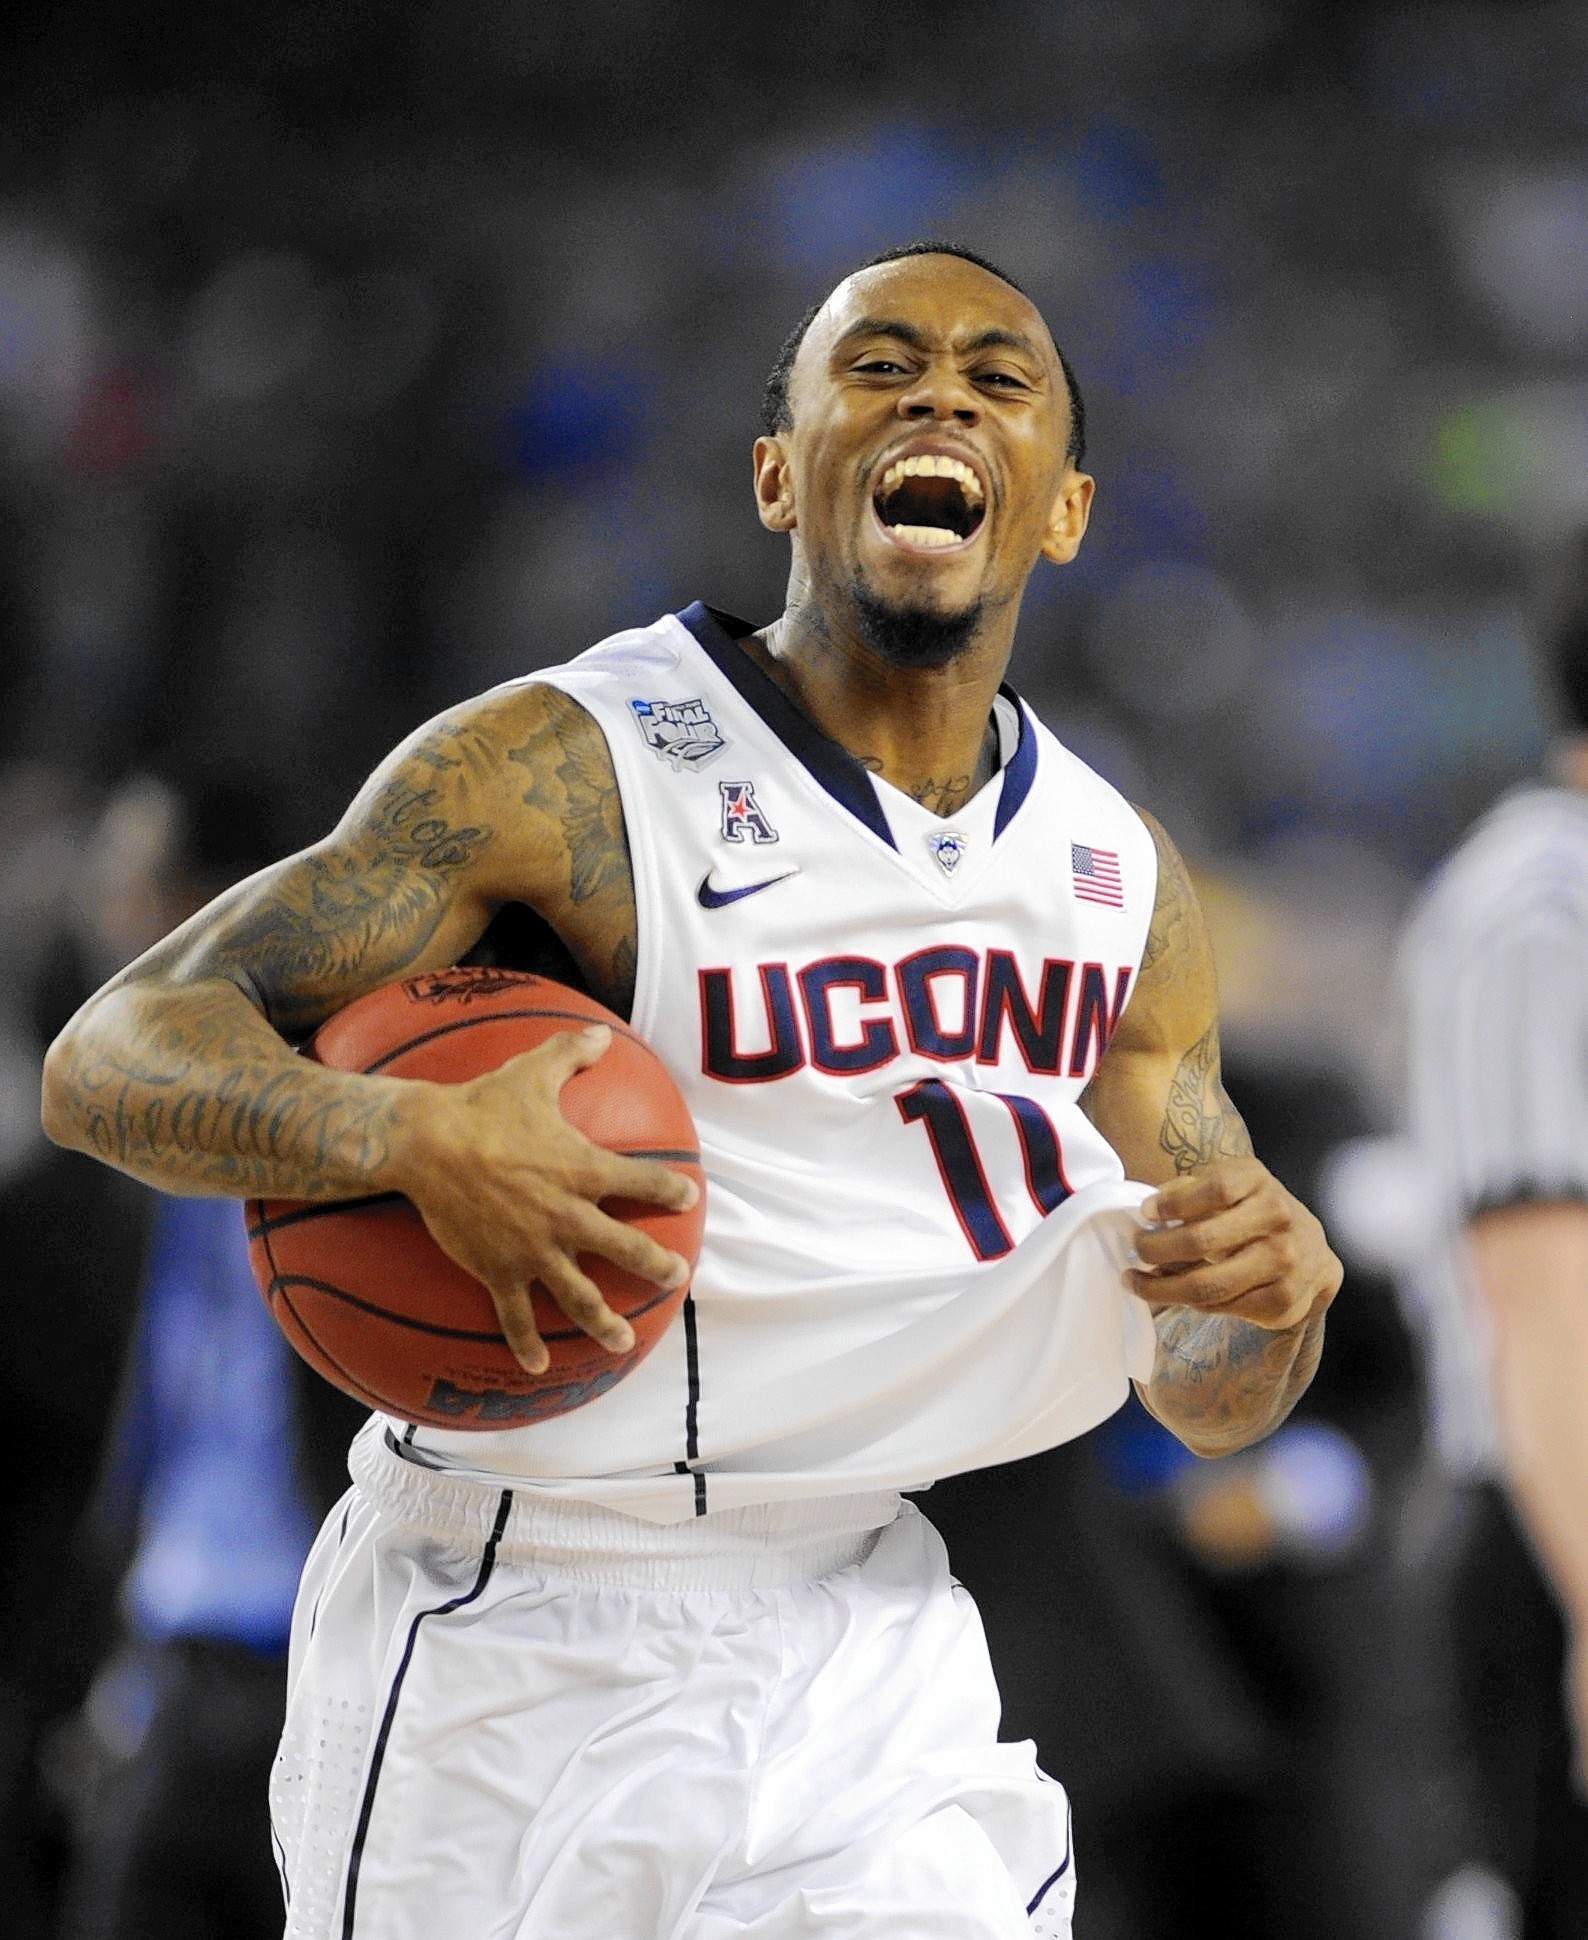 Ryan Boatright leaves NBA's D-League, signs to play in Italy - Aurora Beacon-News1588 x 1940